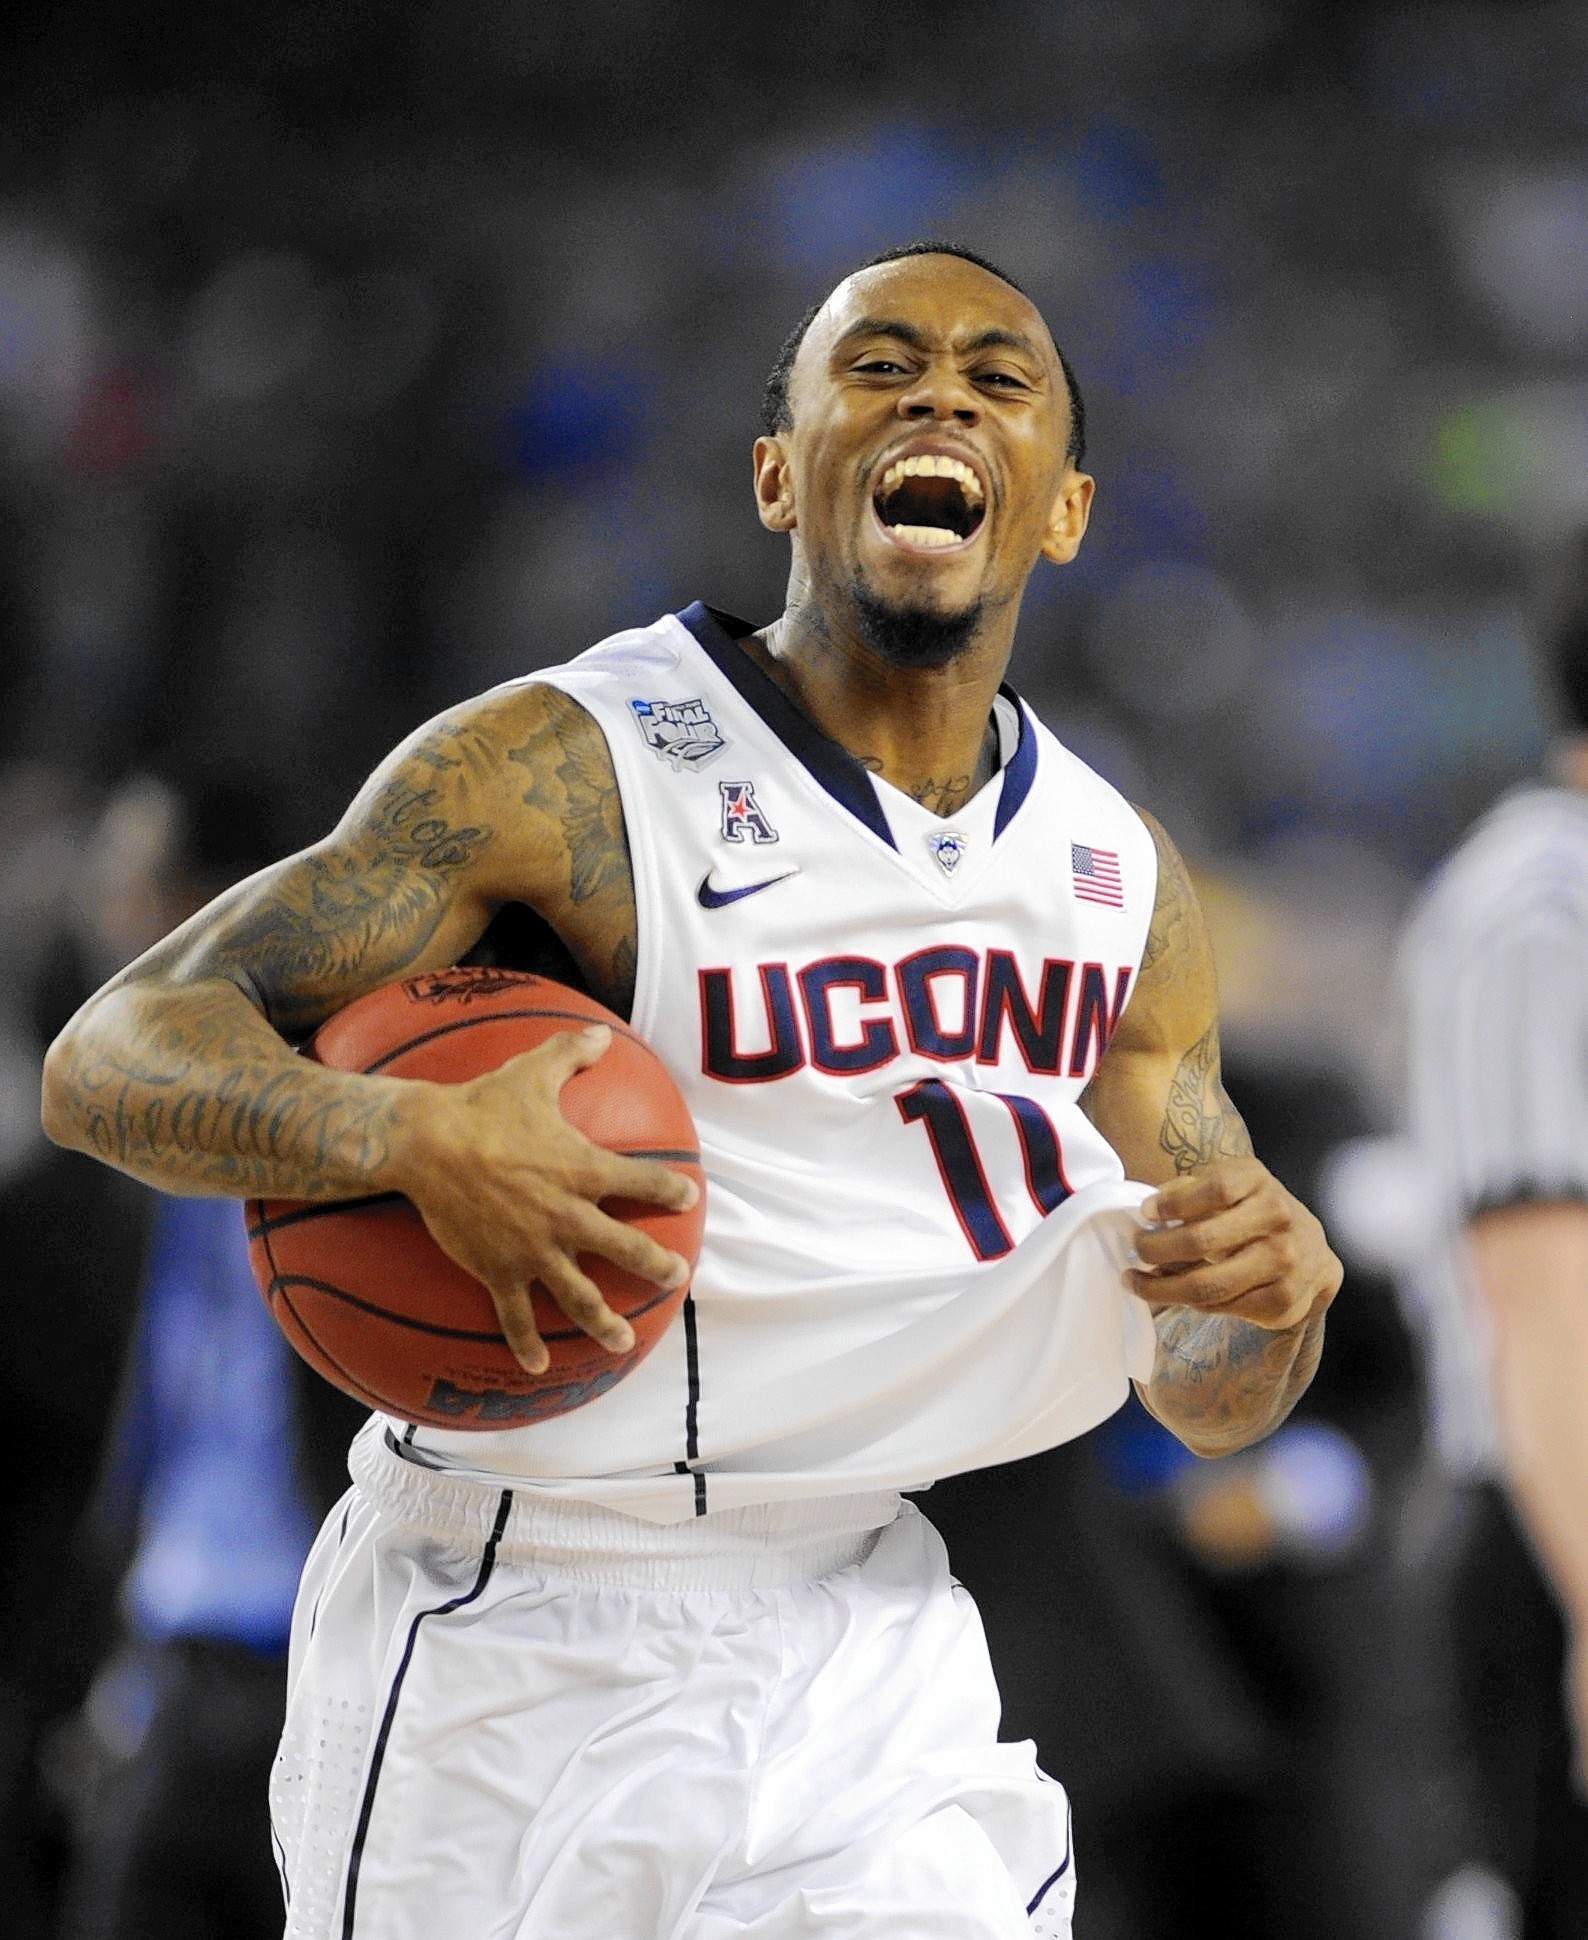 Ryan Boatright leaves NBA's D-League, signs to play in Italy - Aurora Beacon-News1588 x 1940